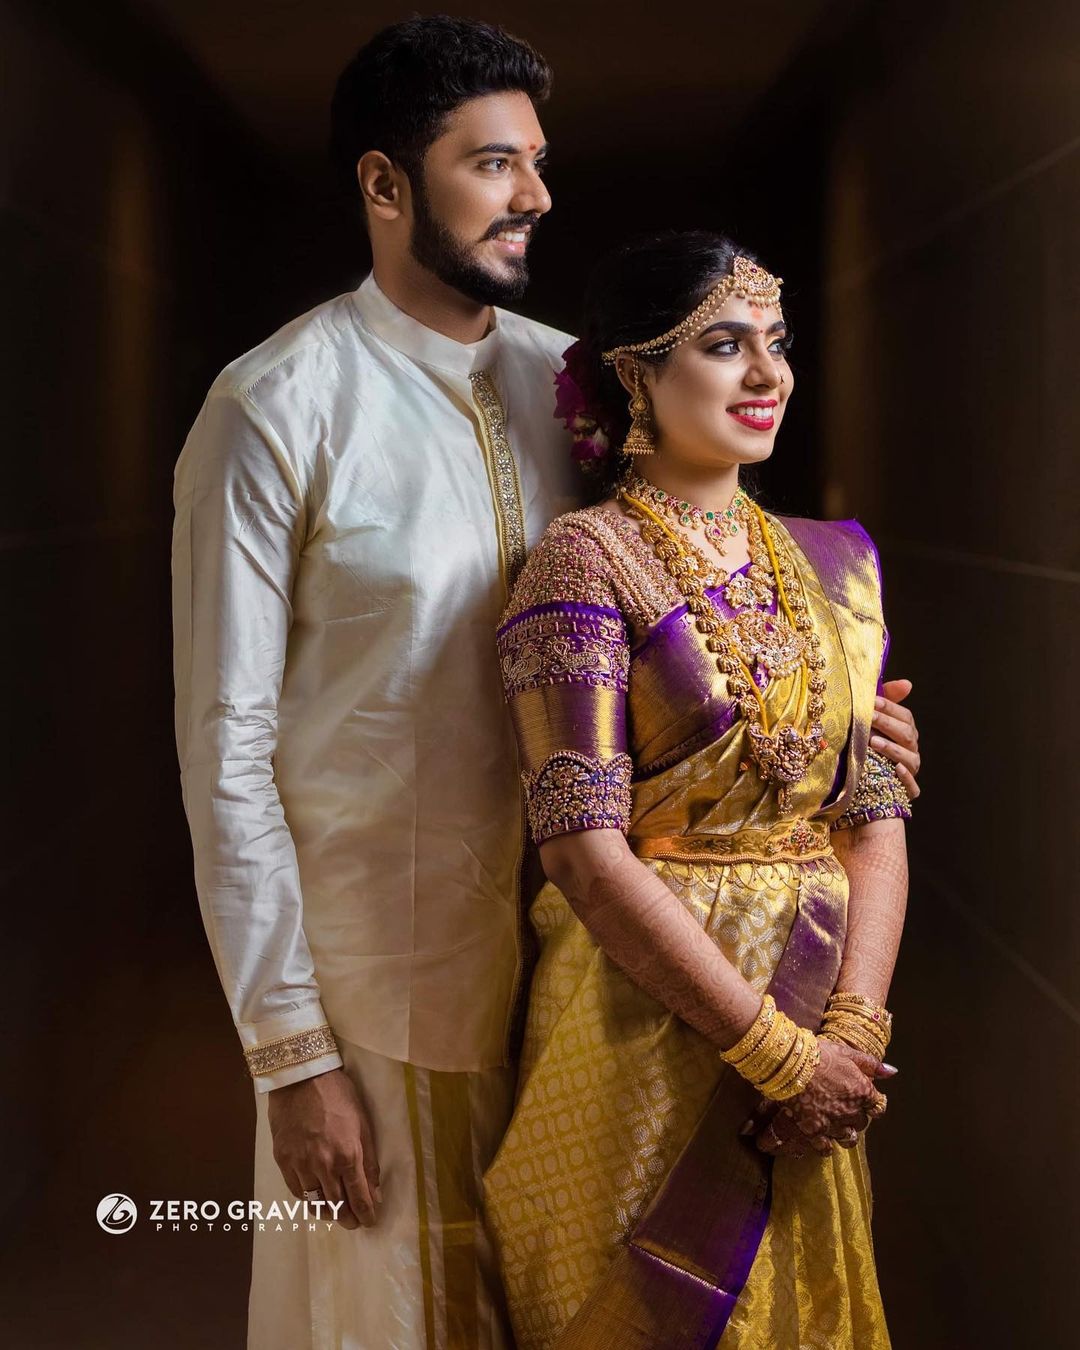 Best candid wedding photographers in chennai Tamilnadu wedding photos takes  a speaci… | Wedding photoshoot poses, Bride photoshoot, Wedding couple  poses photography